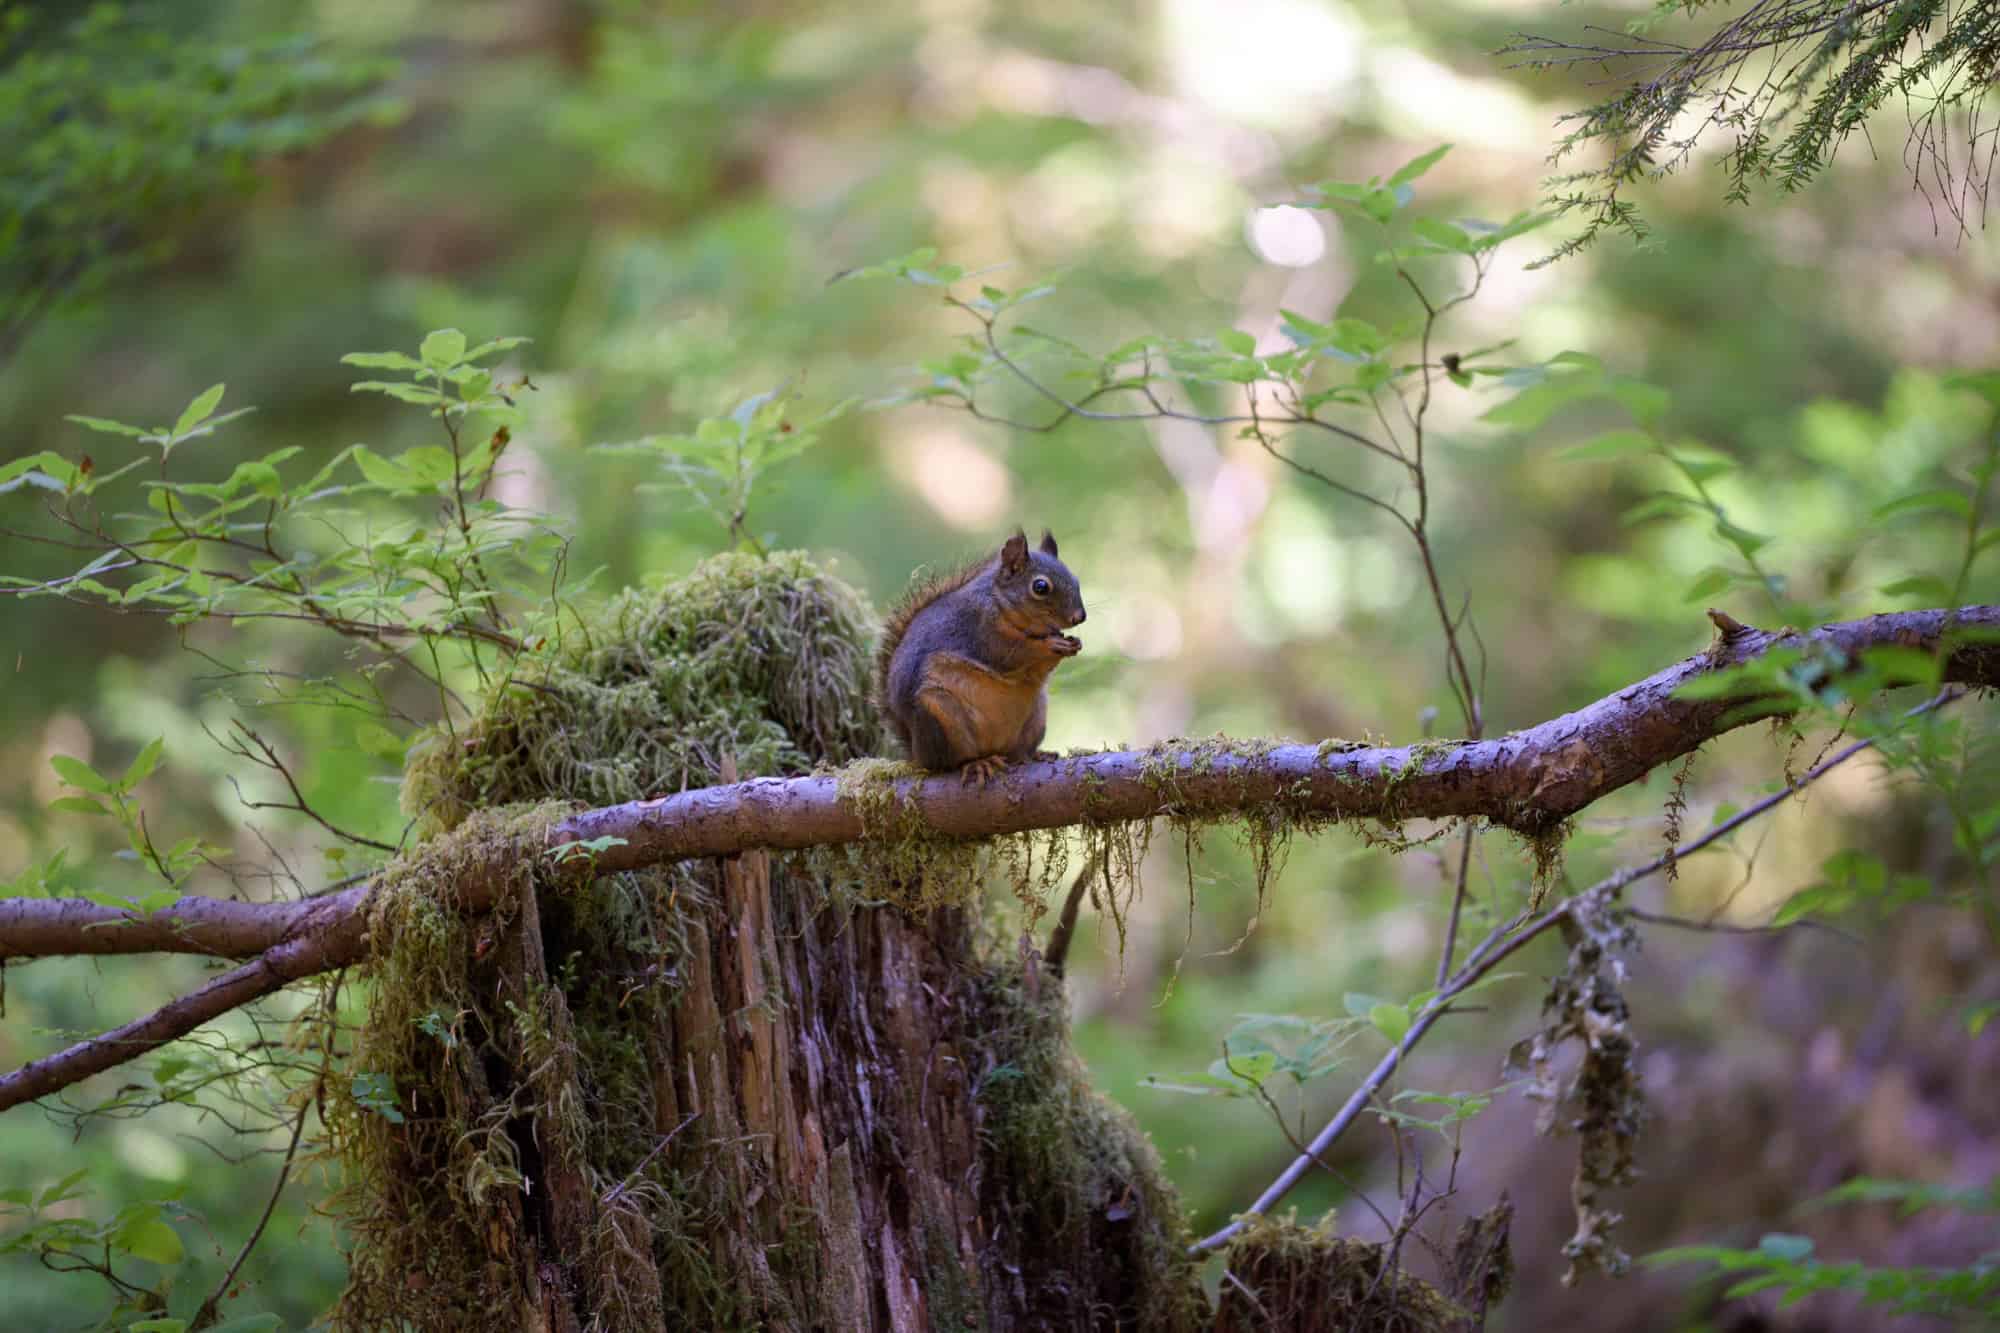 a squirrel sits on a branch surrounded by greenery, various wildlife will hopefully be seen if you are spending one day in olympic national park